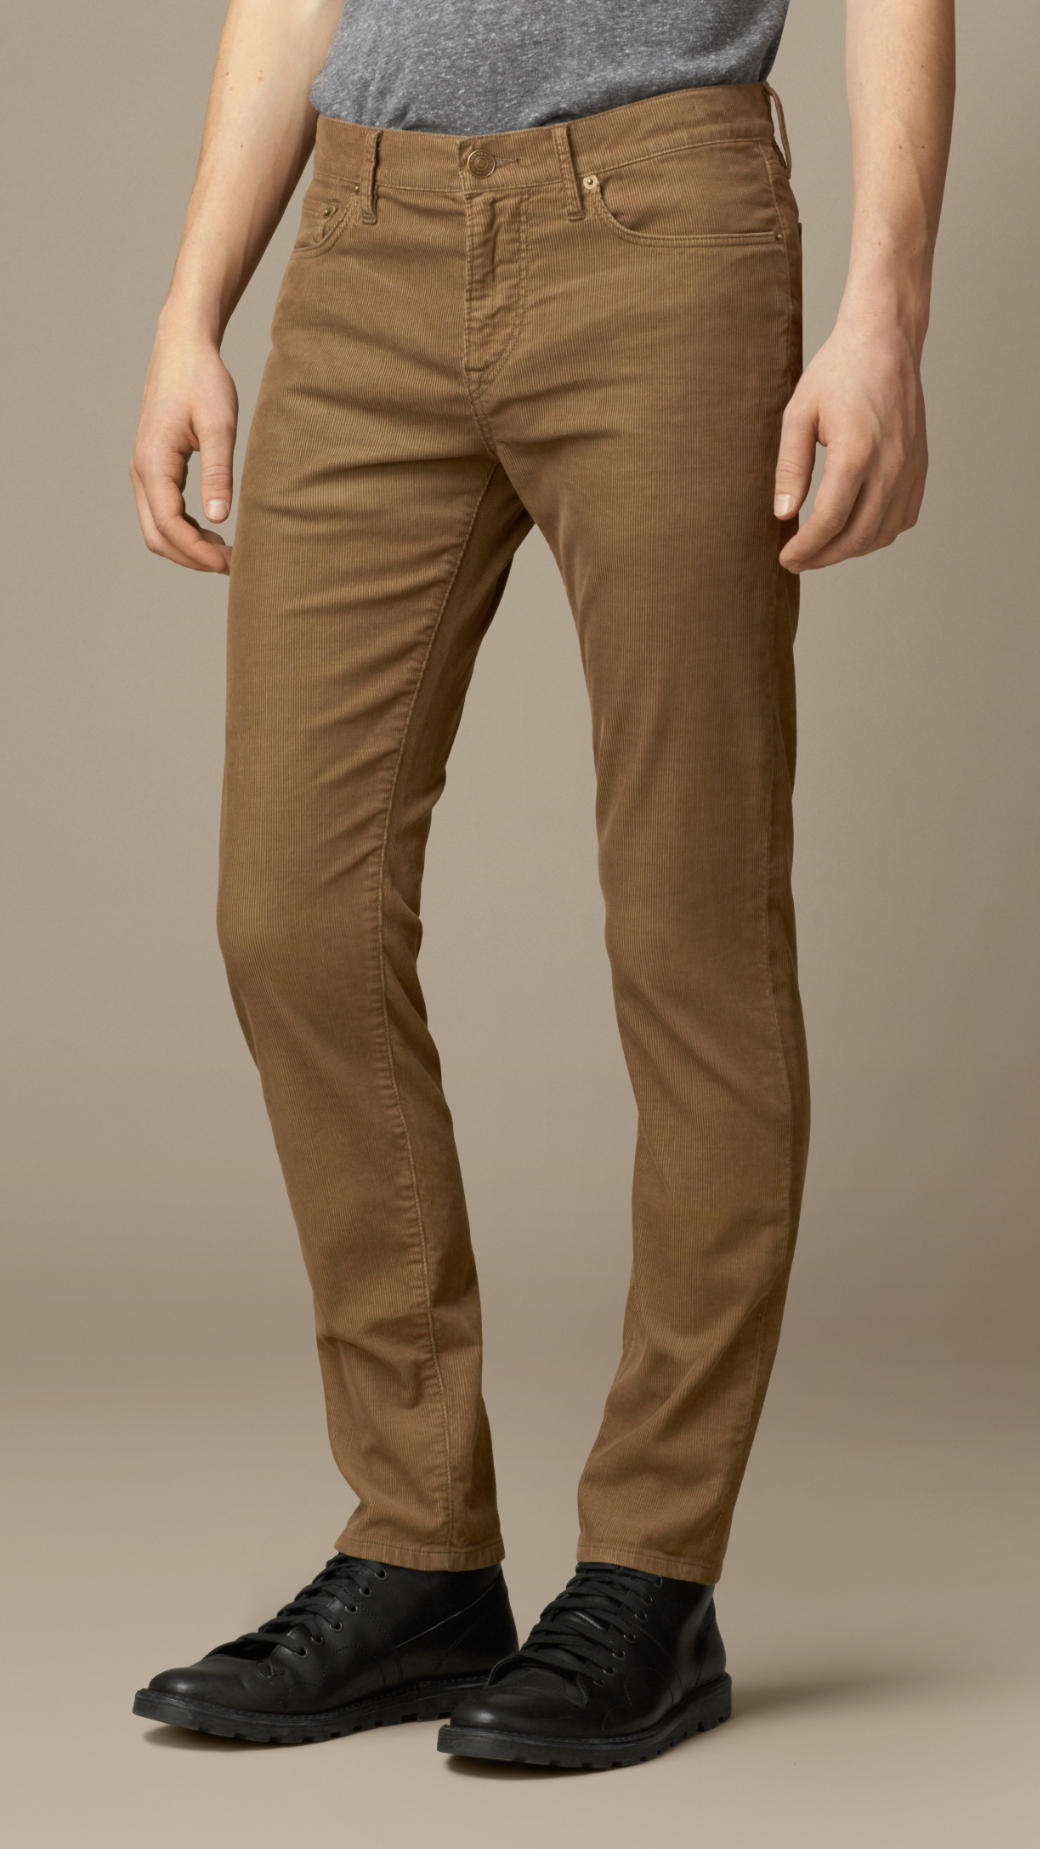 Burberry Slim Fit Corduroy Trousers in Sand Brown (Brown) for Men - Lyst